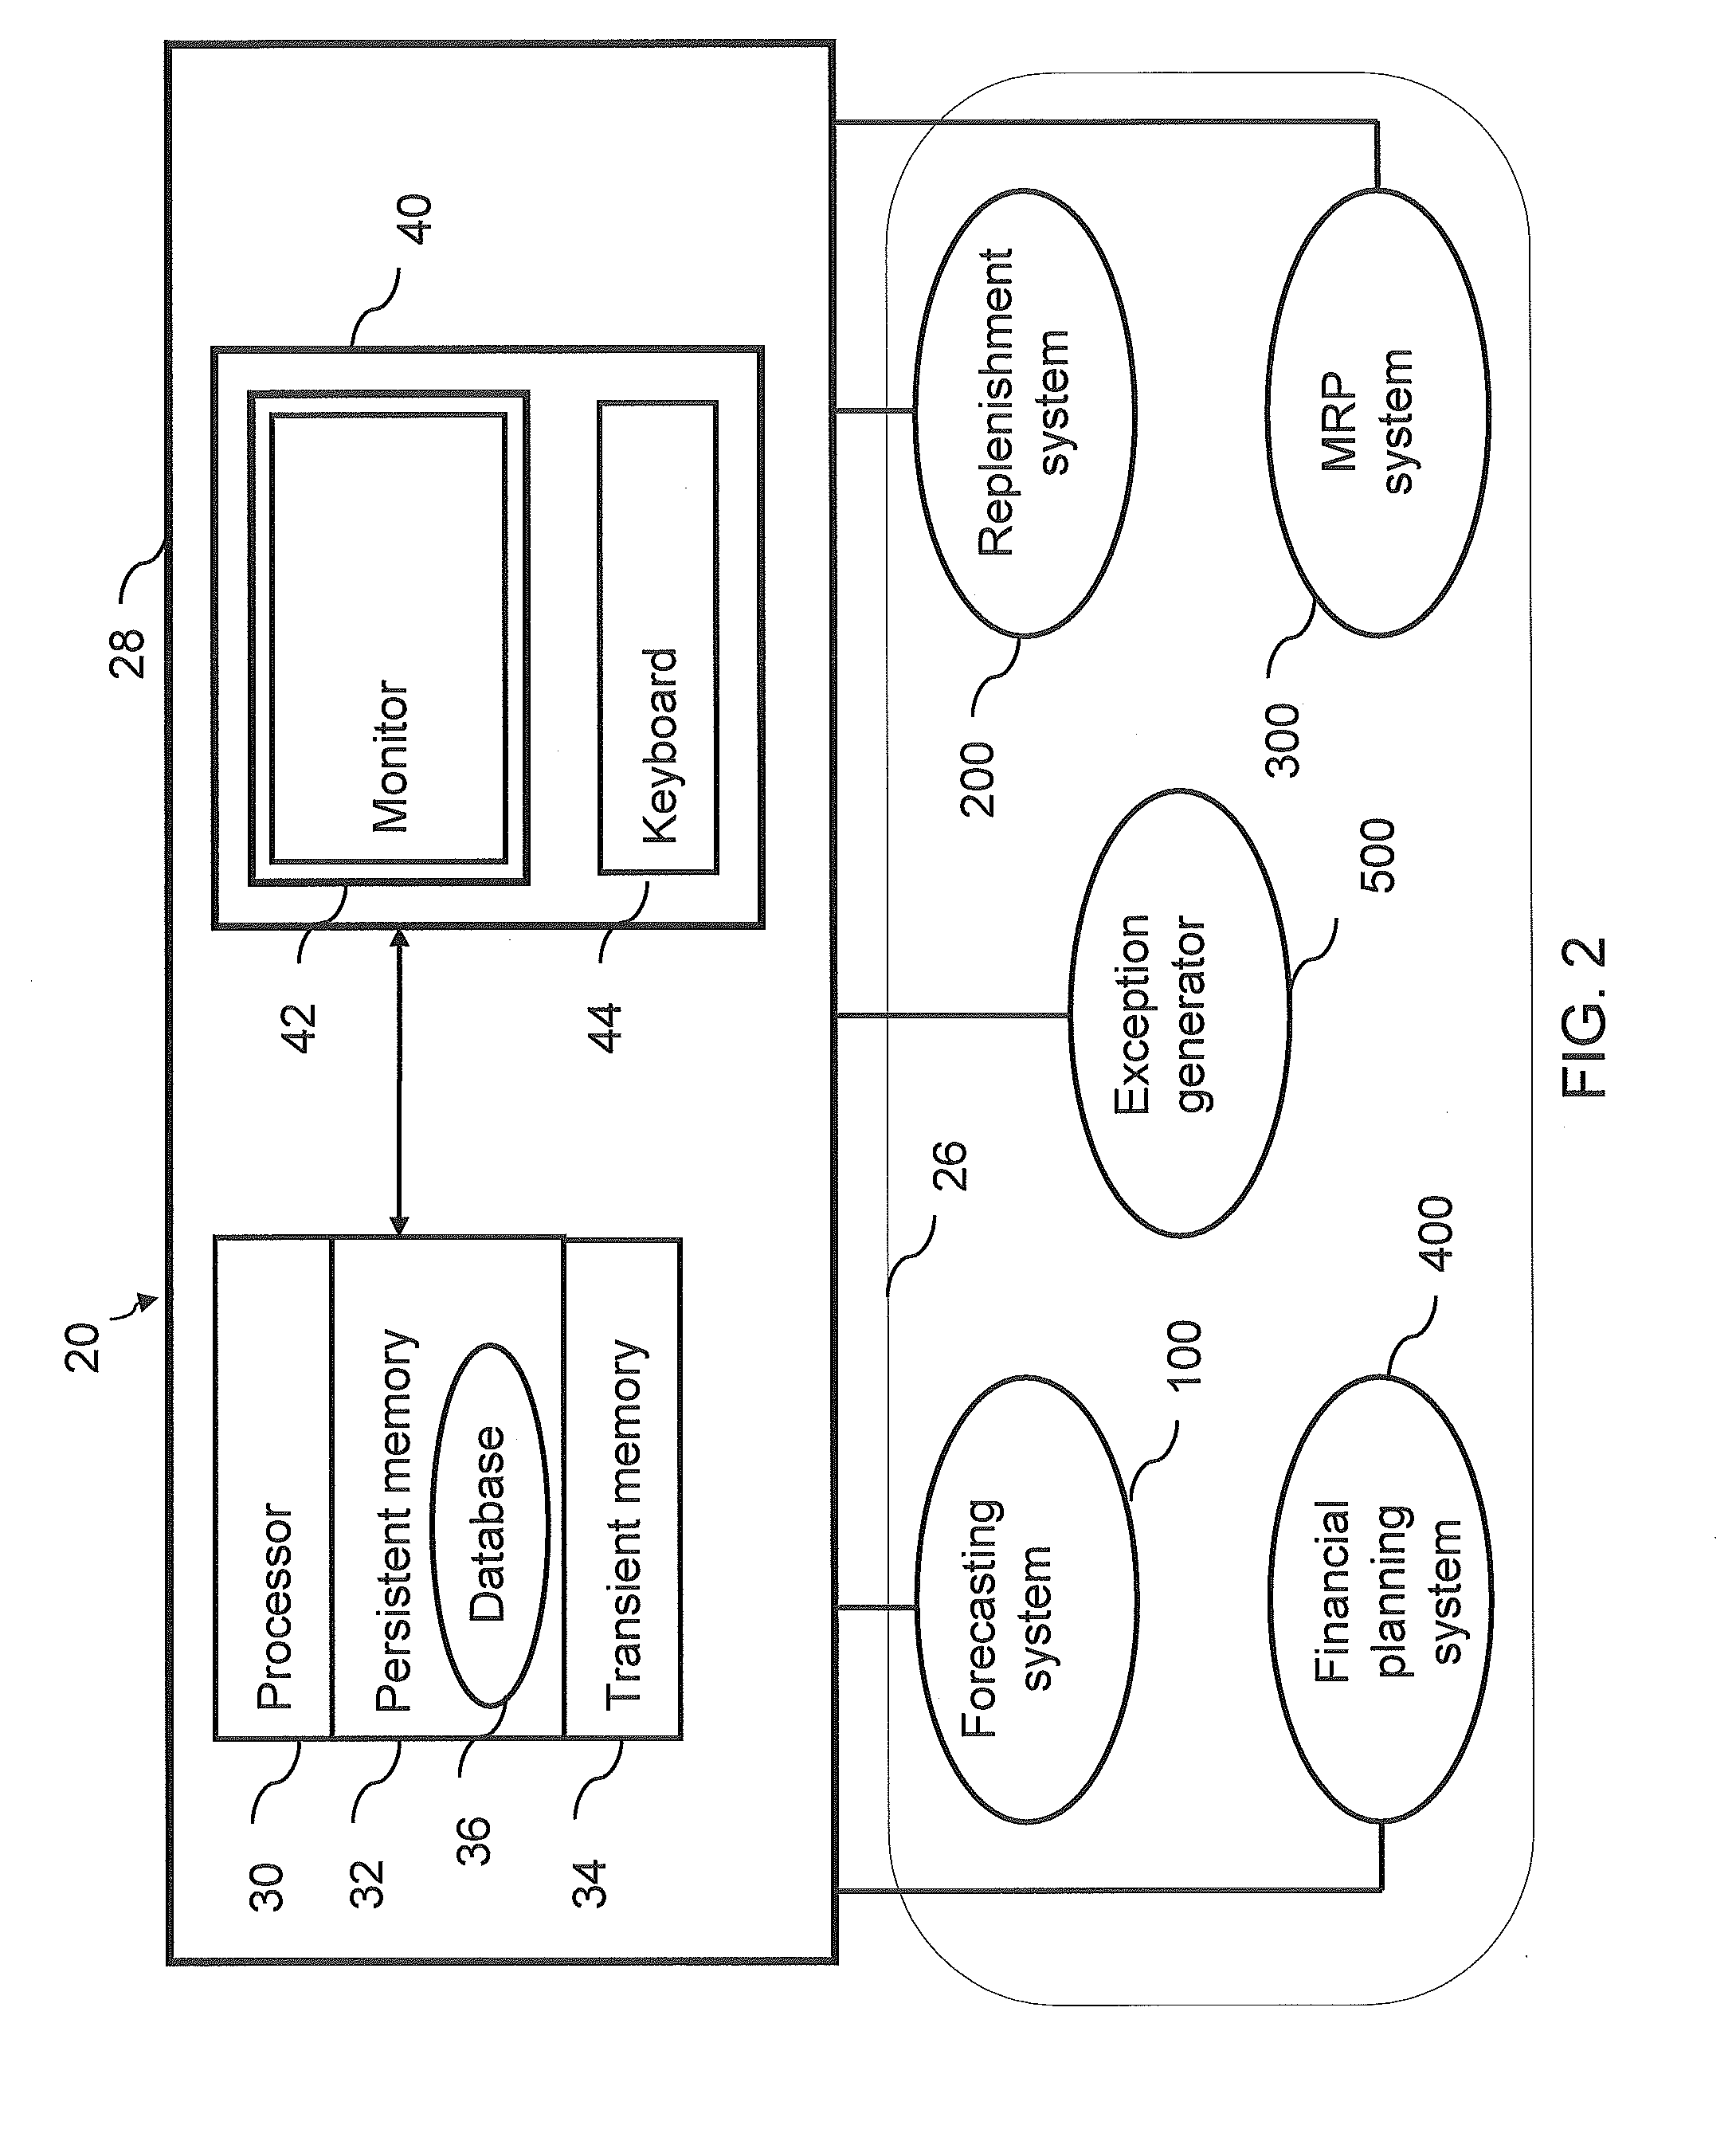 Method and System For Retail Store Supply Chain Sales Forecasting and Replenishment Shipment Determination